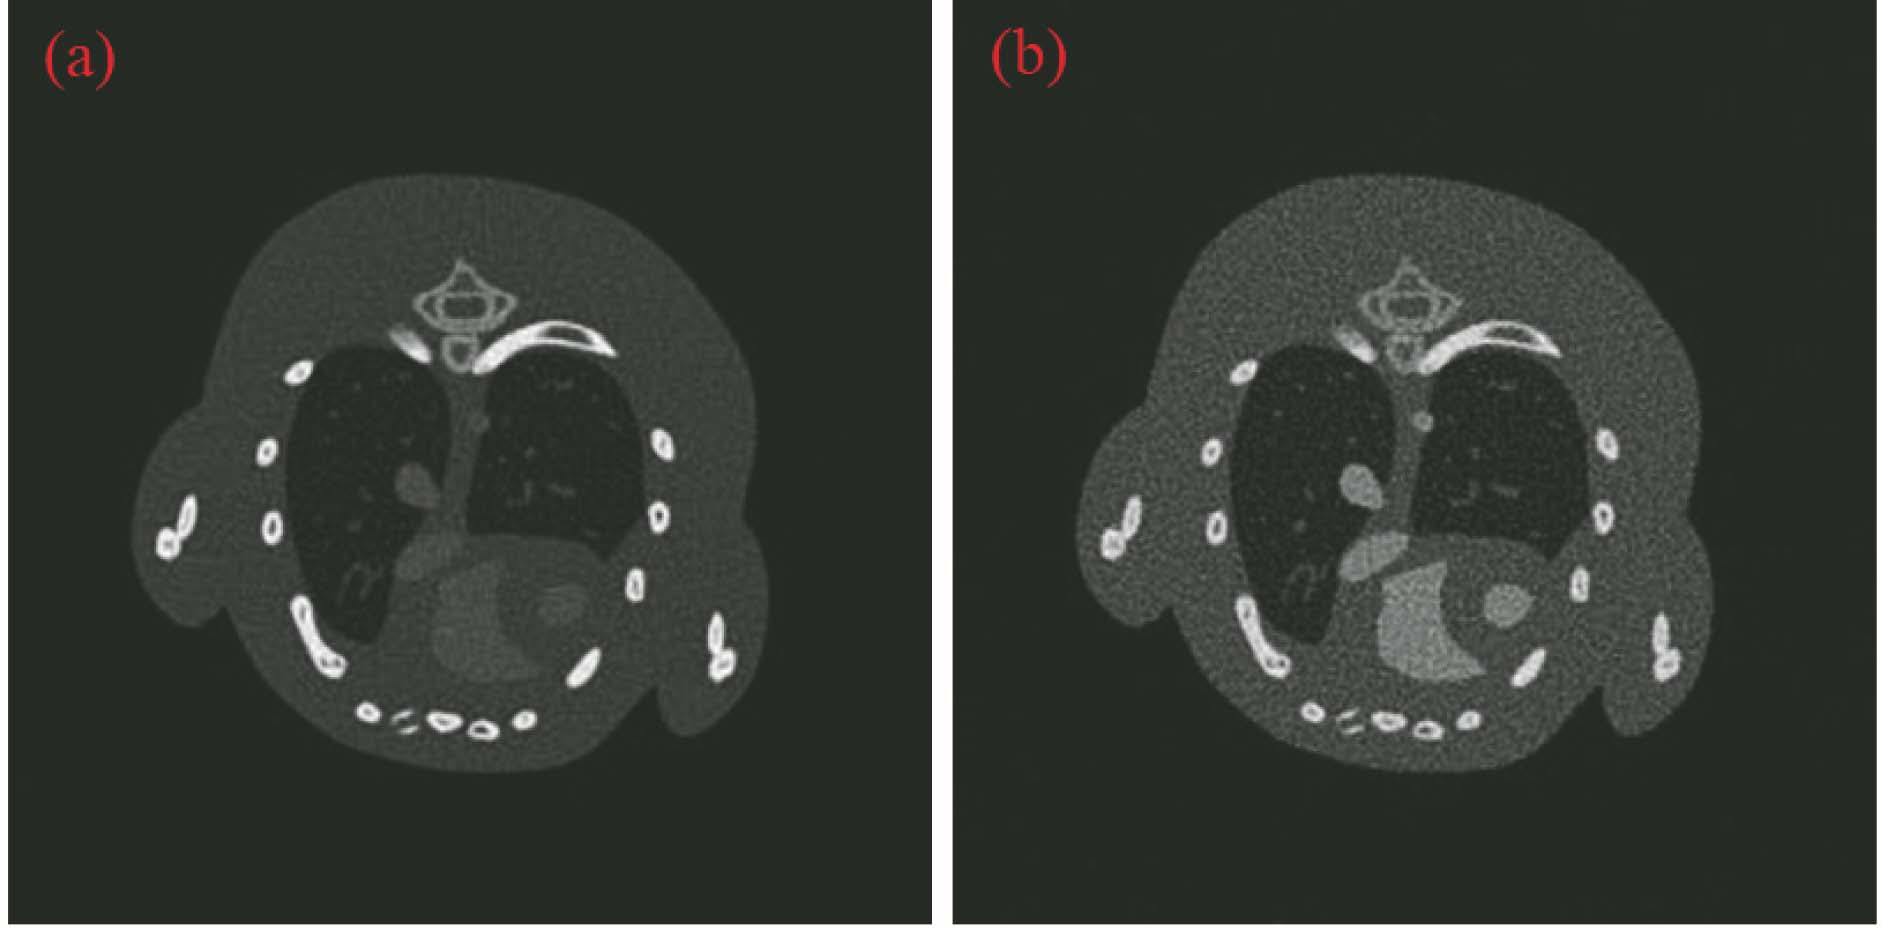 Reconstruction results of mouse thorax phantom by SIRT in high and low energies. (a) High energy reconstruction image; (b) low energy reconstruction image